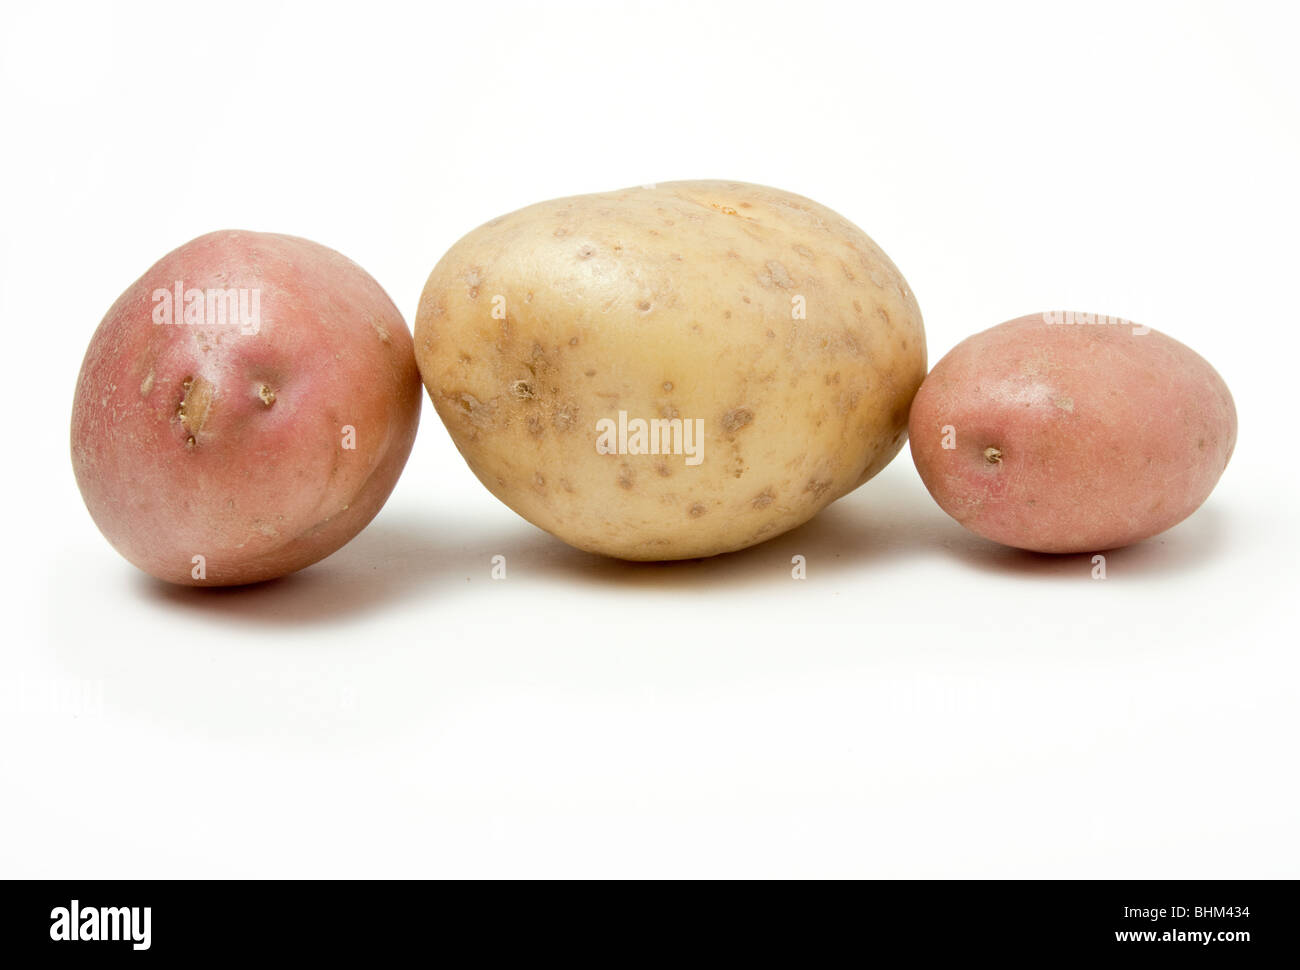 Potato Line up of two red skins and one large baking potato against white background. Stock Photo